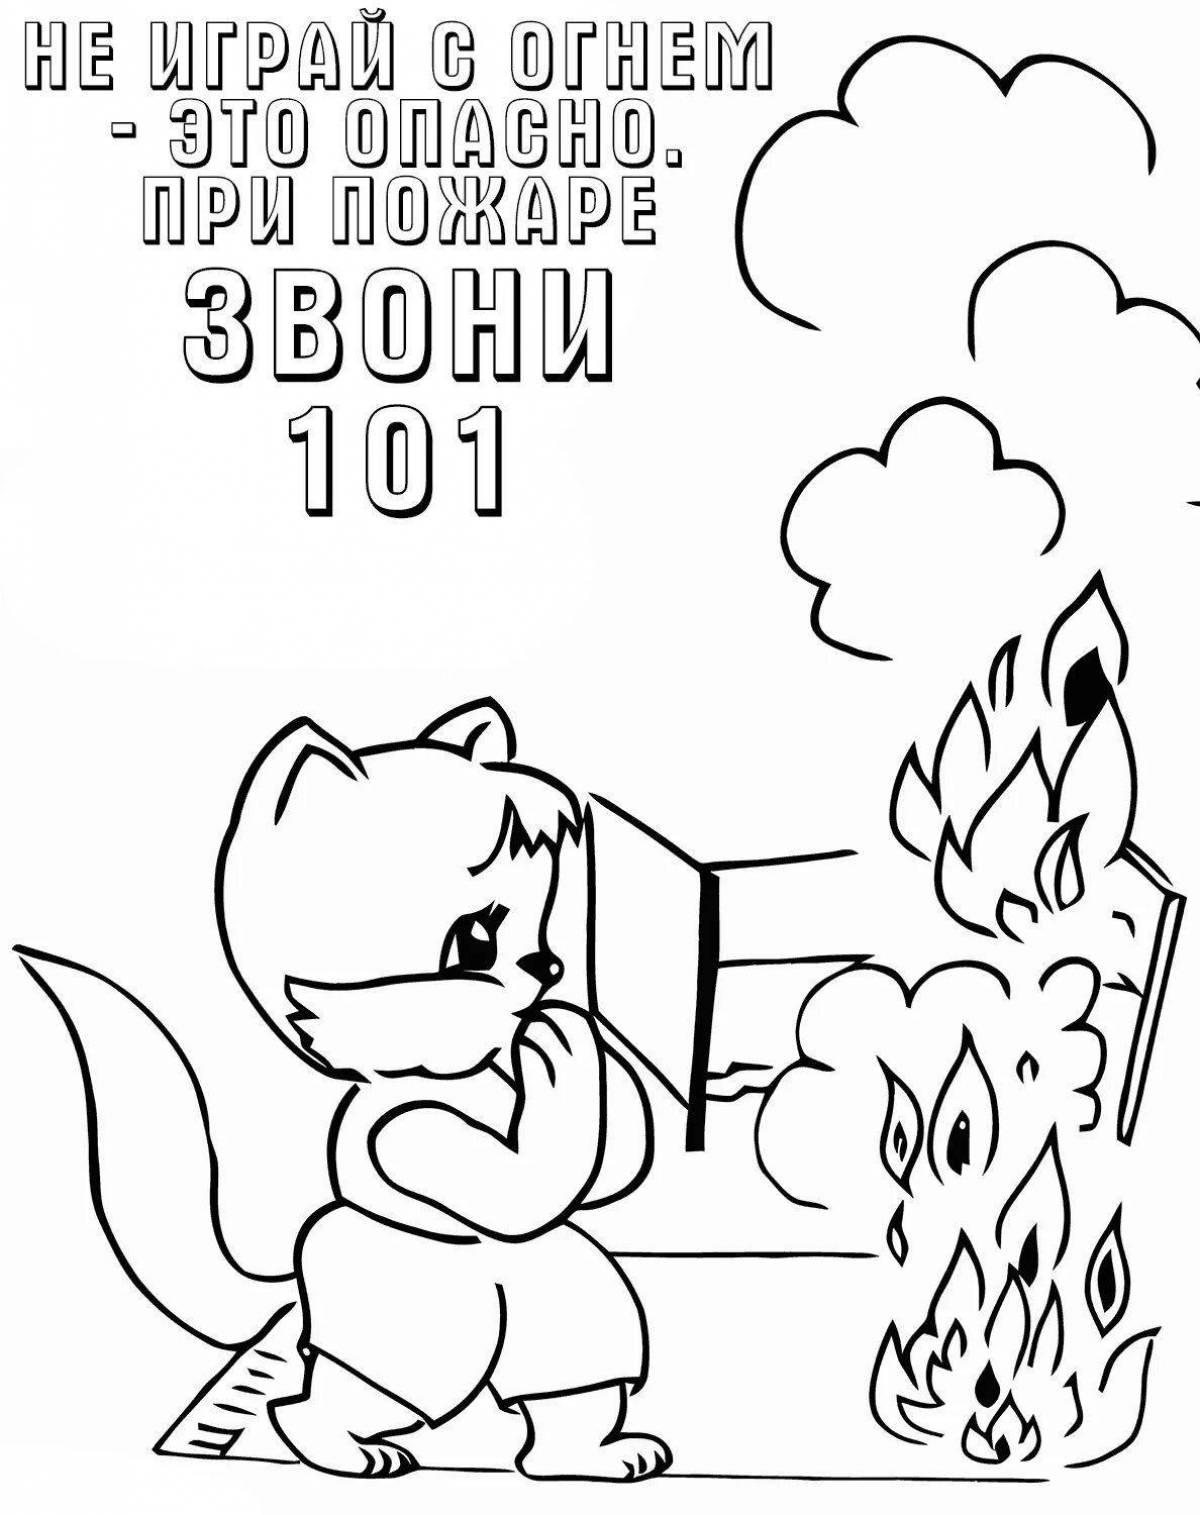 Commemorative fire safety coloring book